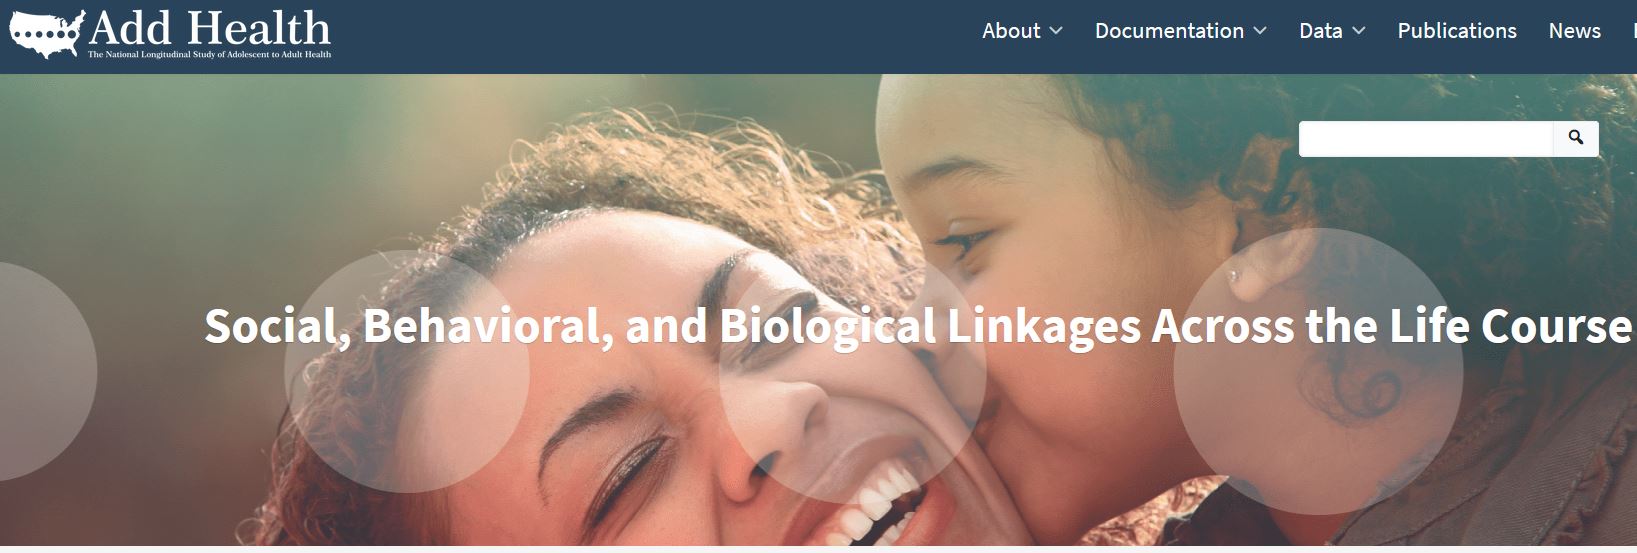 Screenshot of Add Health website shows a woman and a younger child embracing with a kiss and the text: "Social, Behavioral and Biological Linkages Across the Life Course"